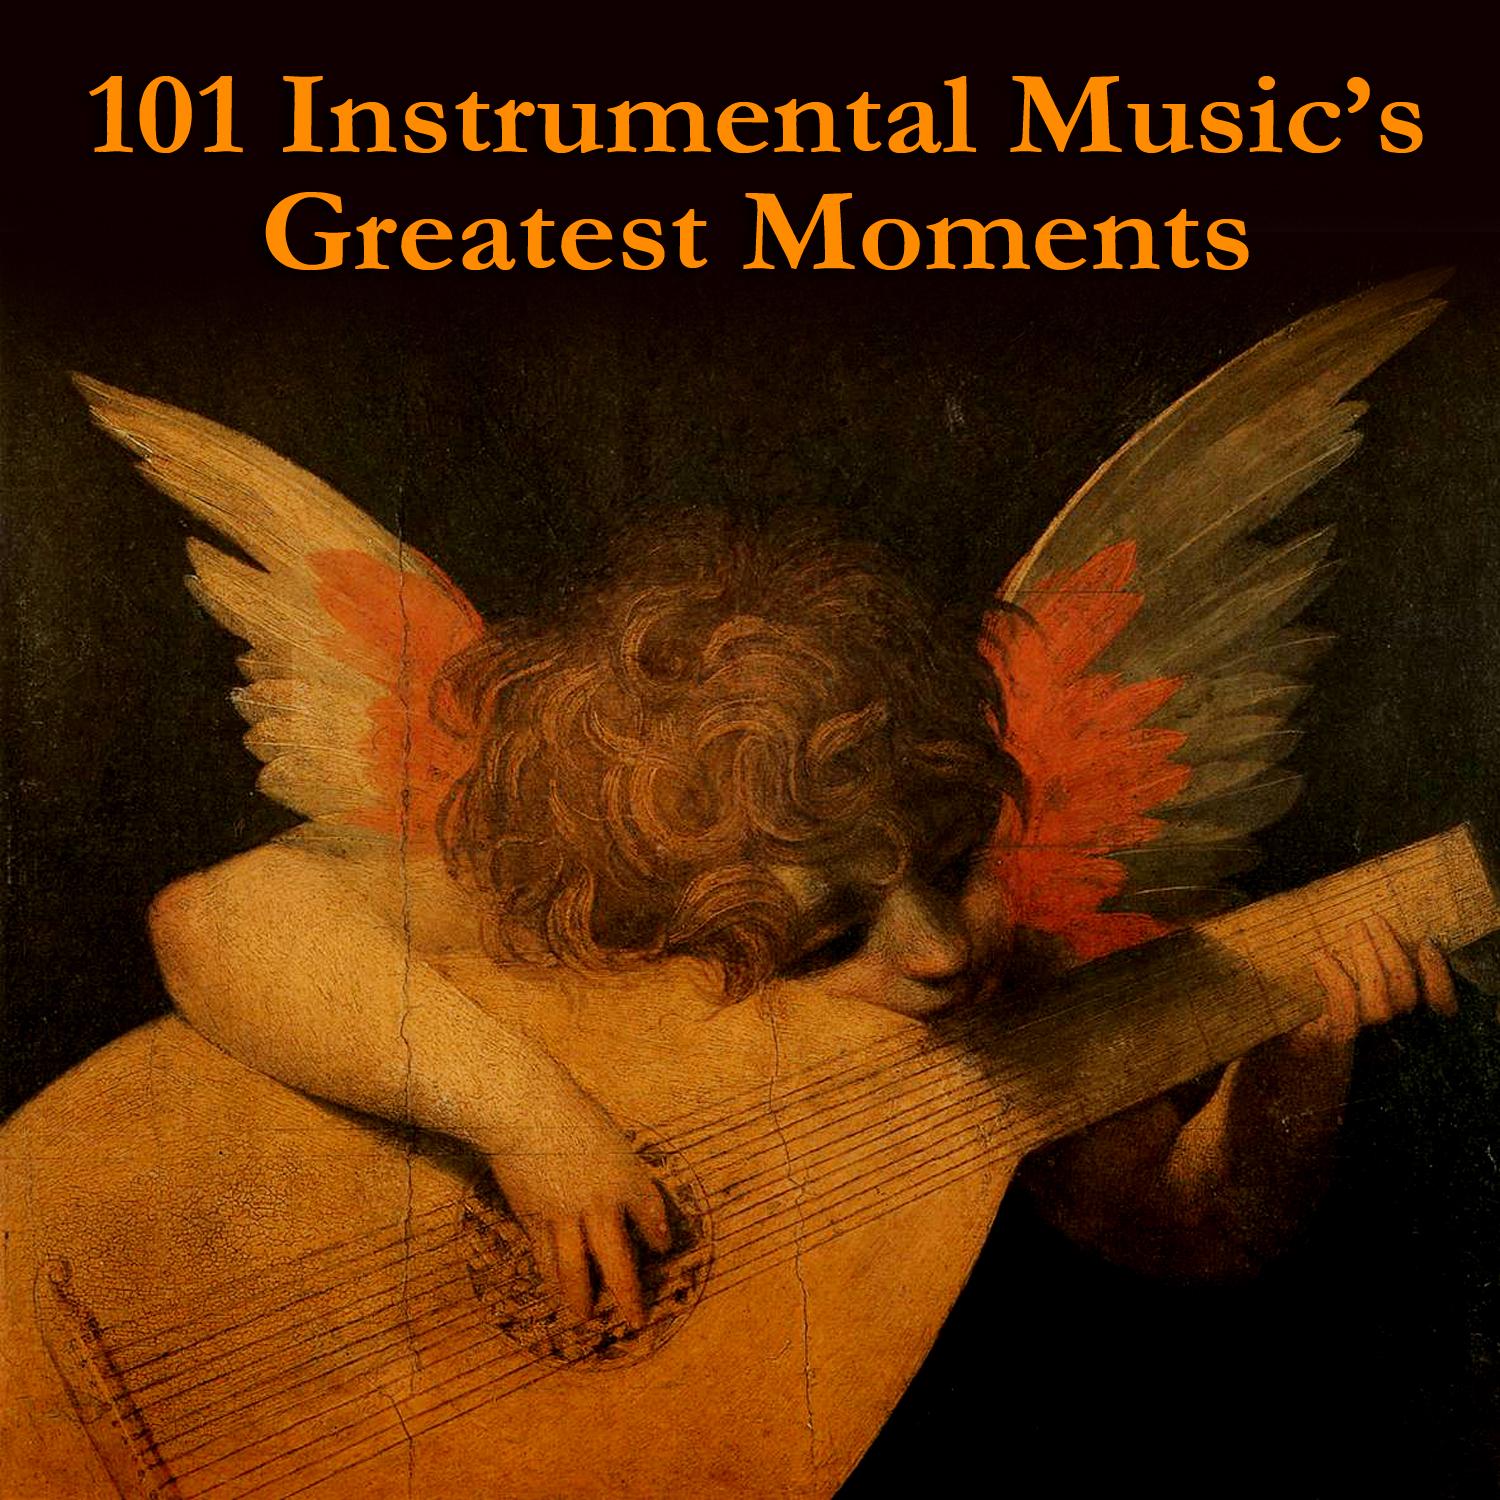 101 Instrumental Music's Greatest Moments